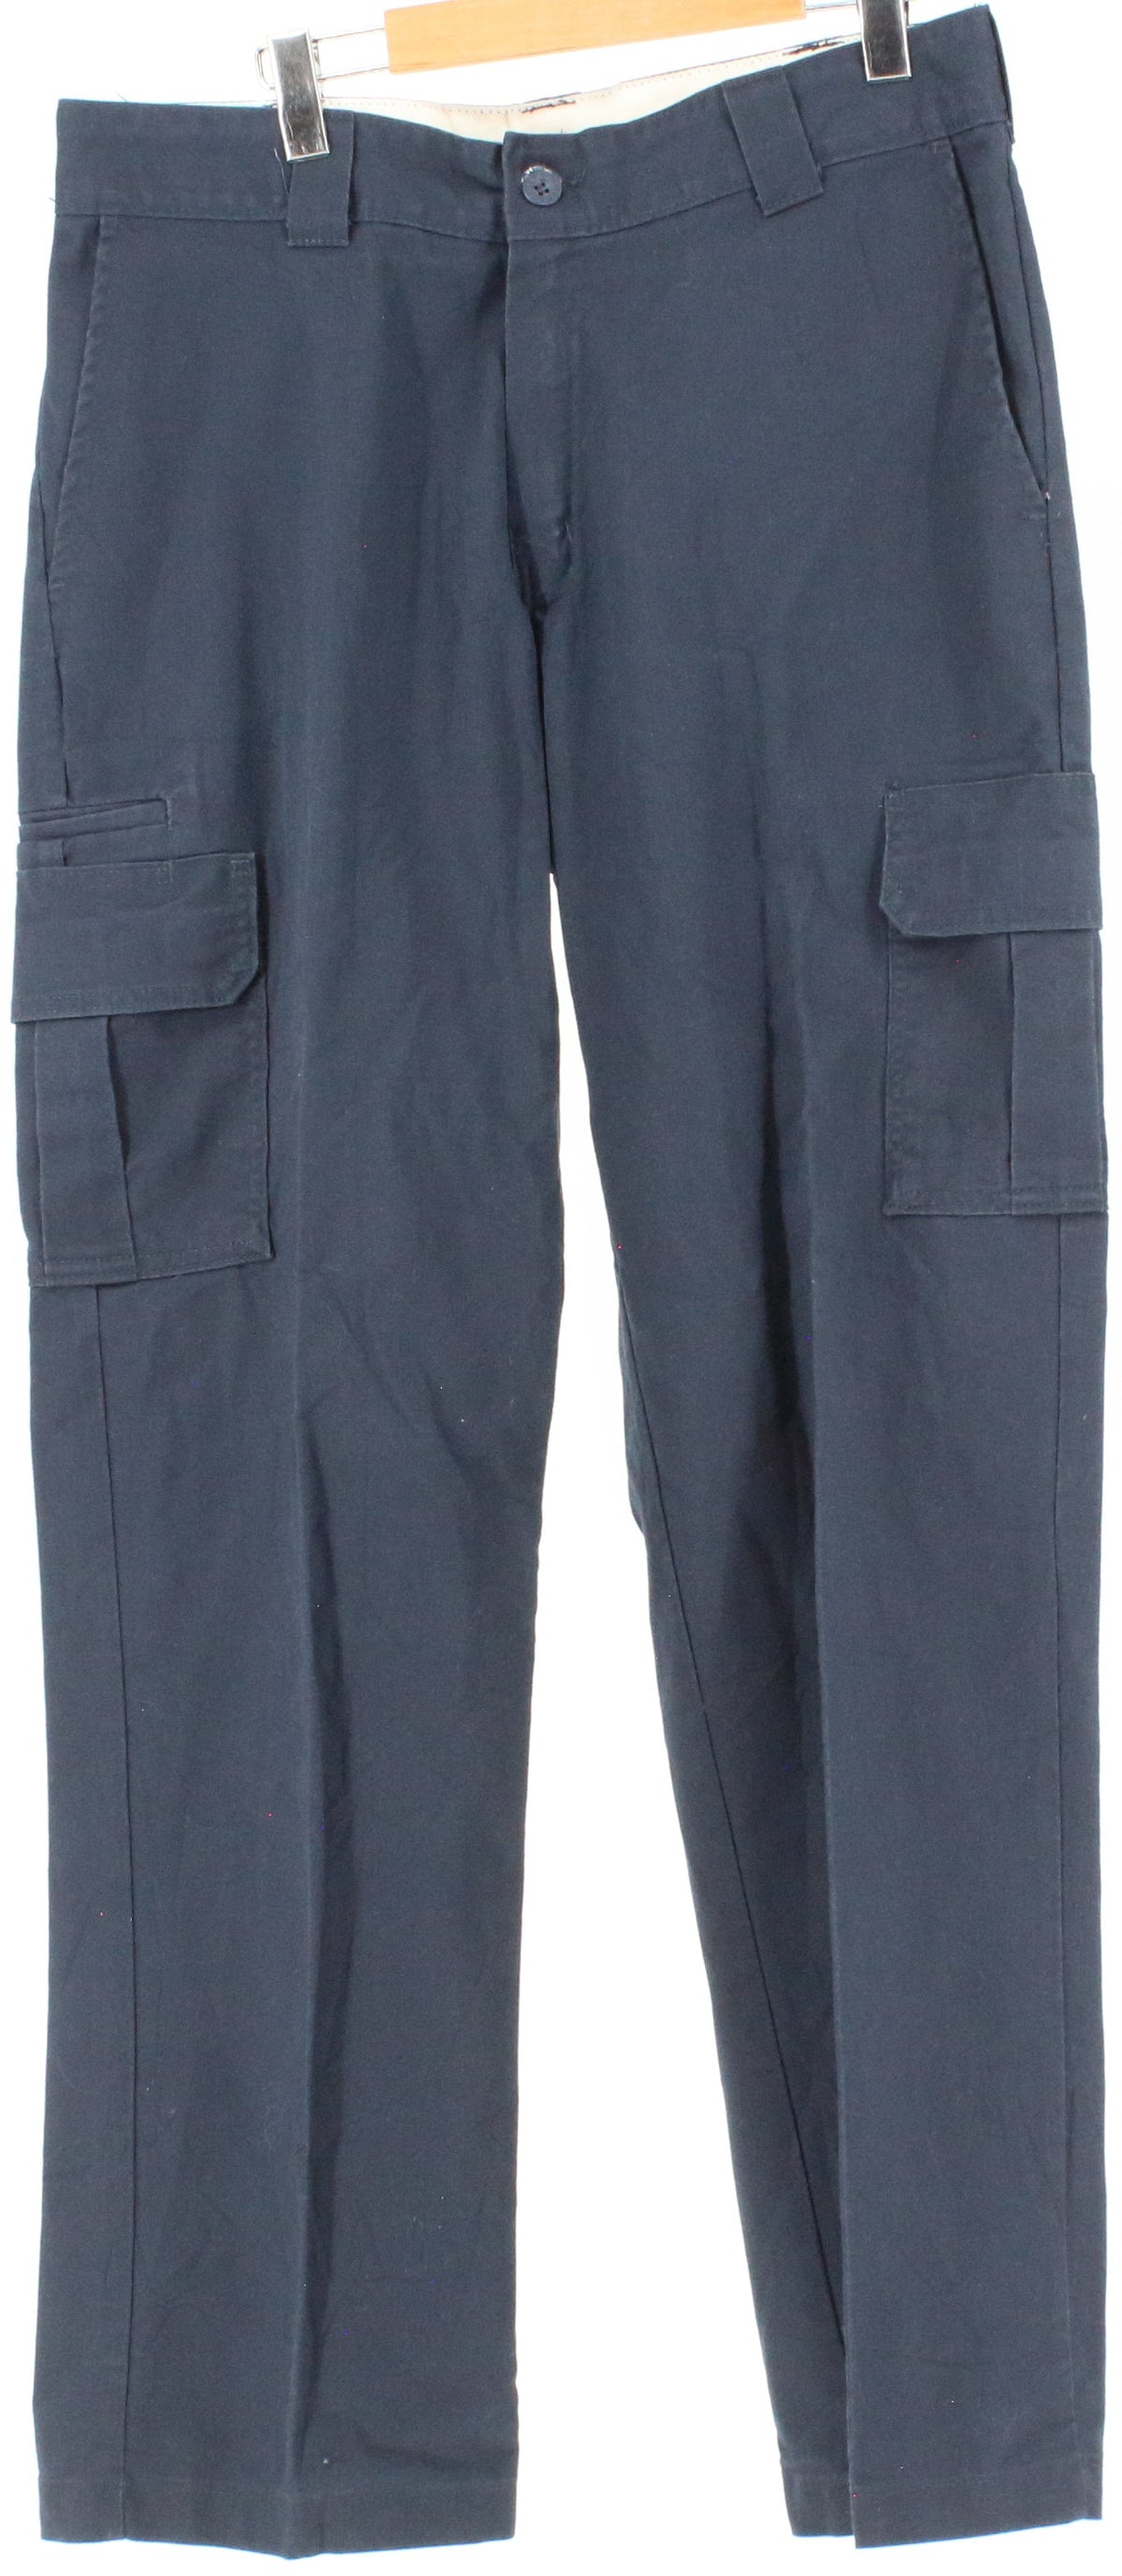 Dickies Relaxed Straight Navy Blue Cargo Pants